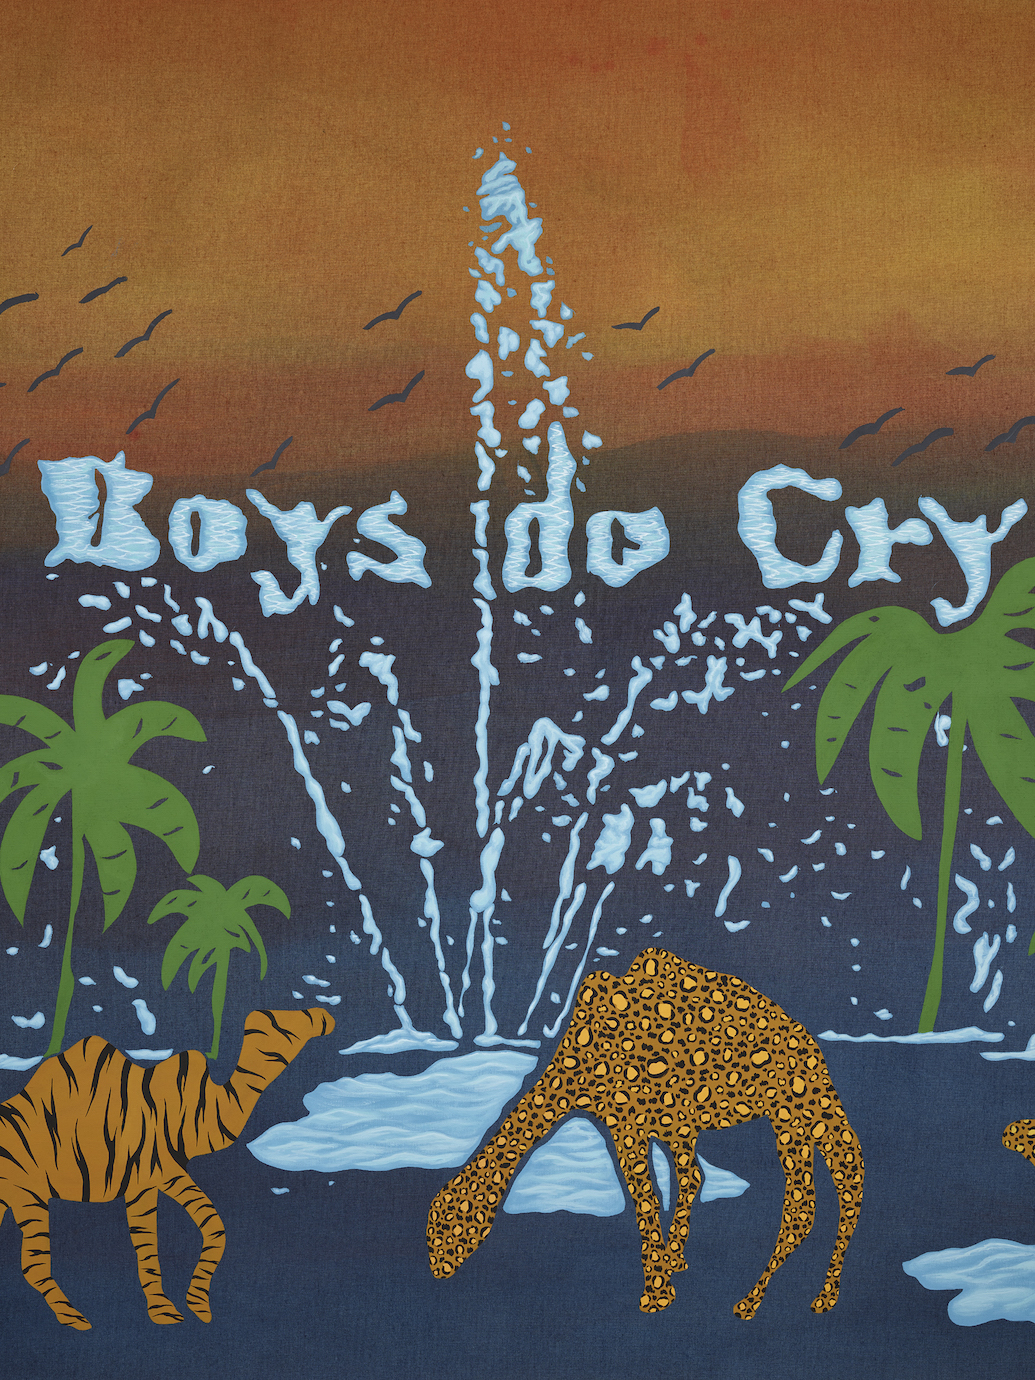 Detail view of Joel Mesler's painting Untitled (Boys Don't Cry)